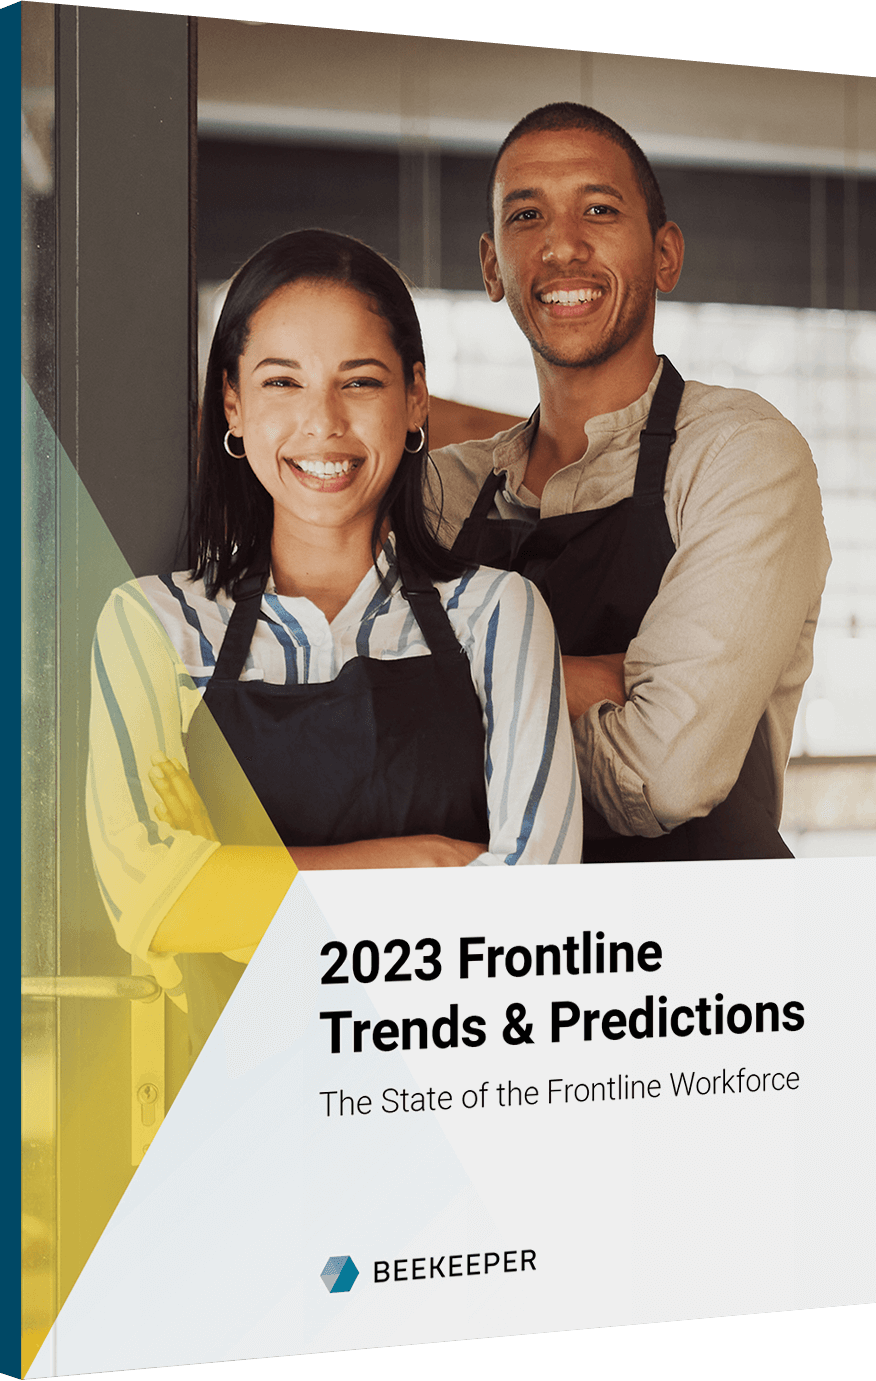 Trends 2023 book cover